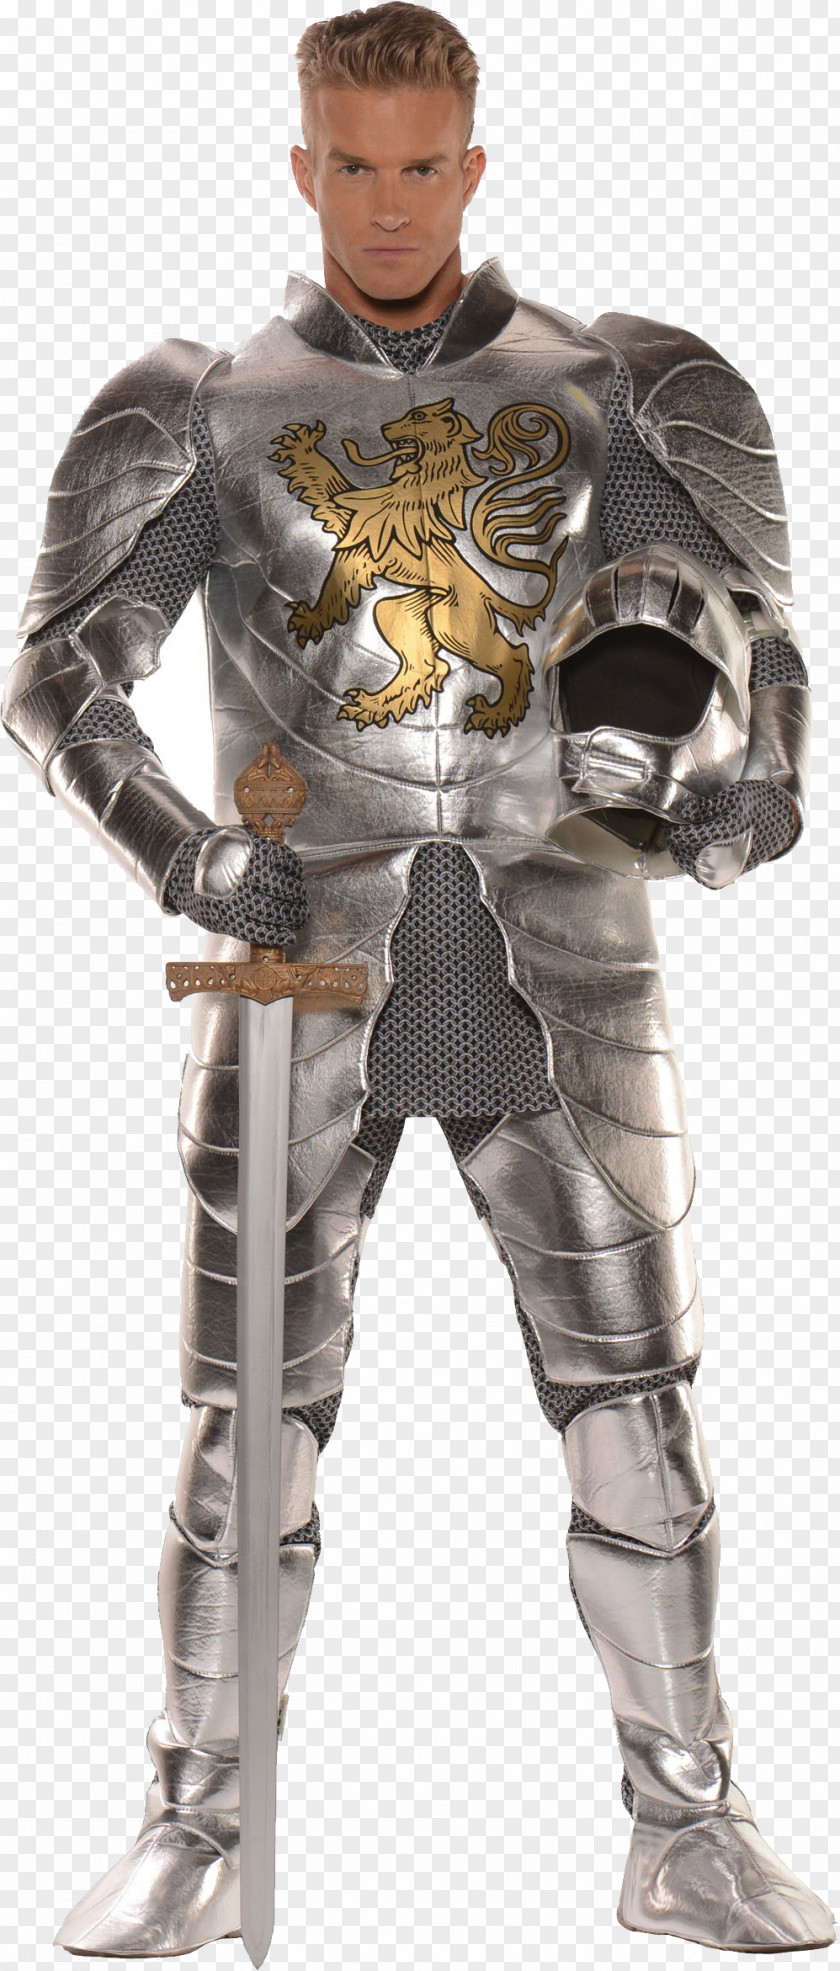 Medival Knight Middle Ages Costume Knight-errant Clothing PNG